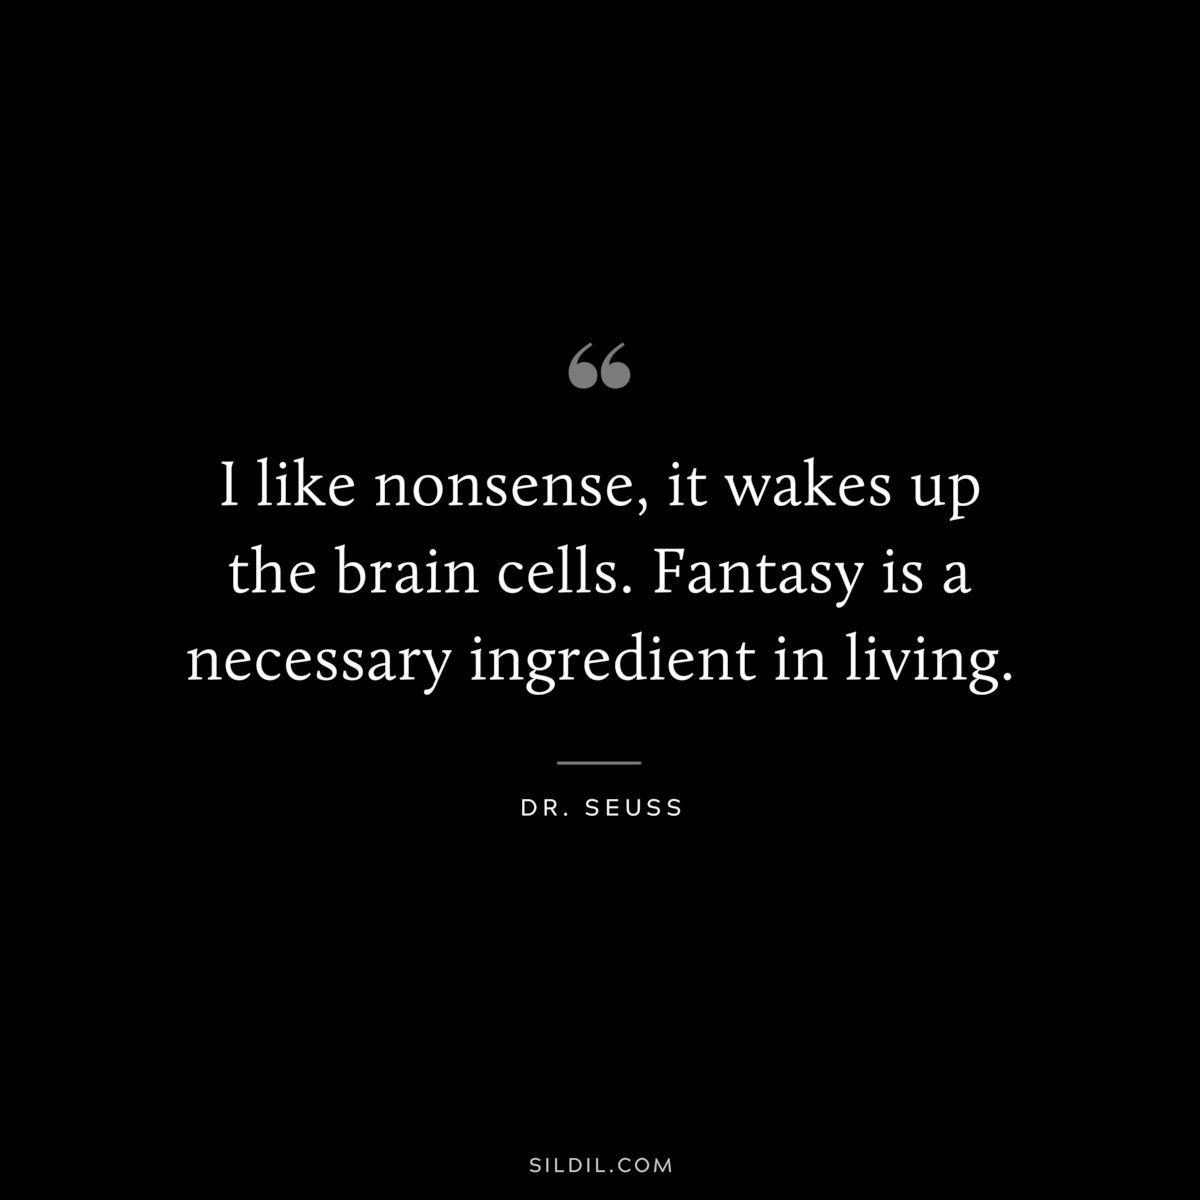 I like nonsense, it wakes up the brain cells. Fantasy is a necessary ingredient in living. ― Dr. Seuss